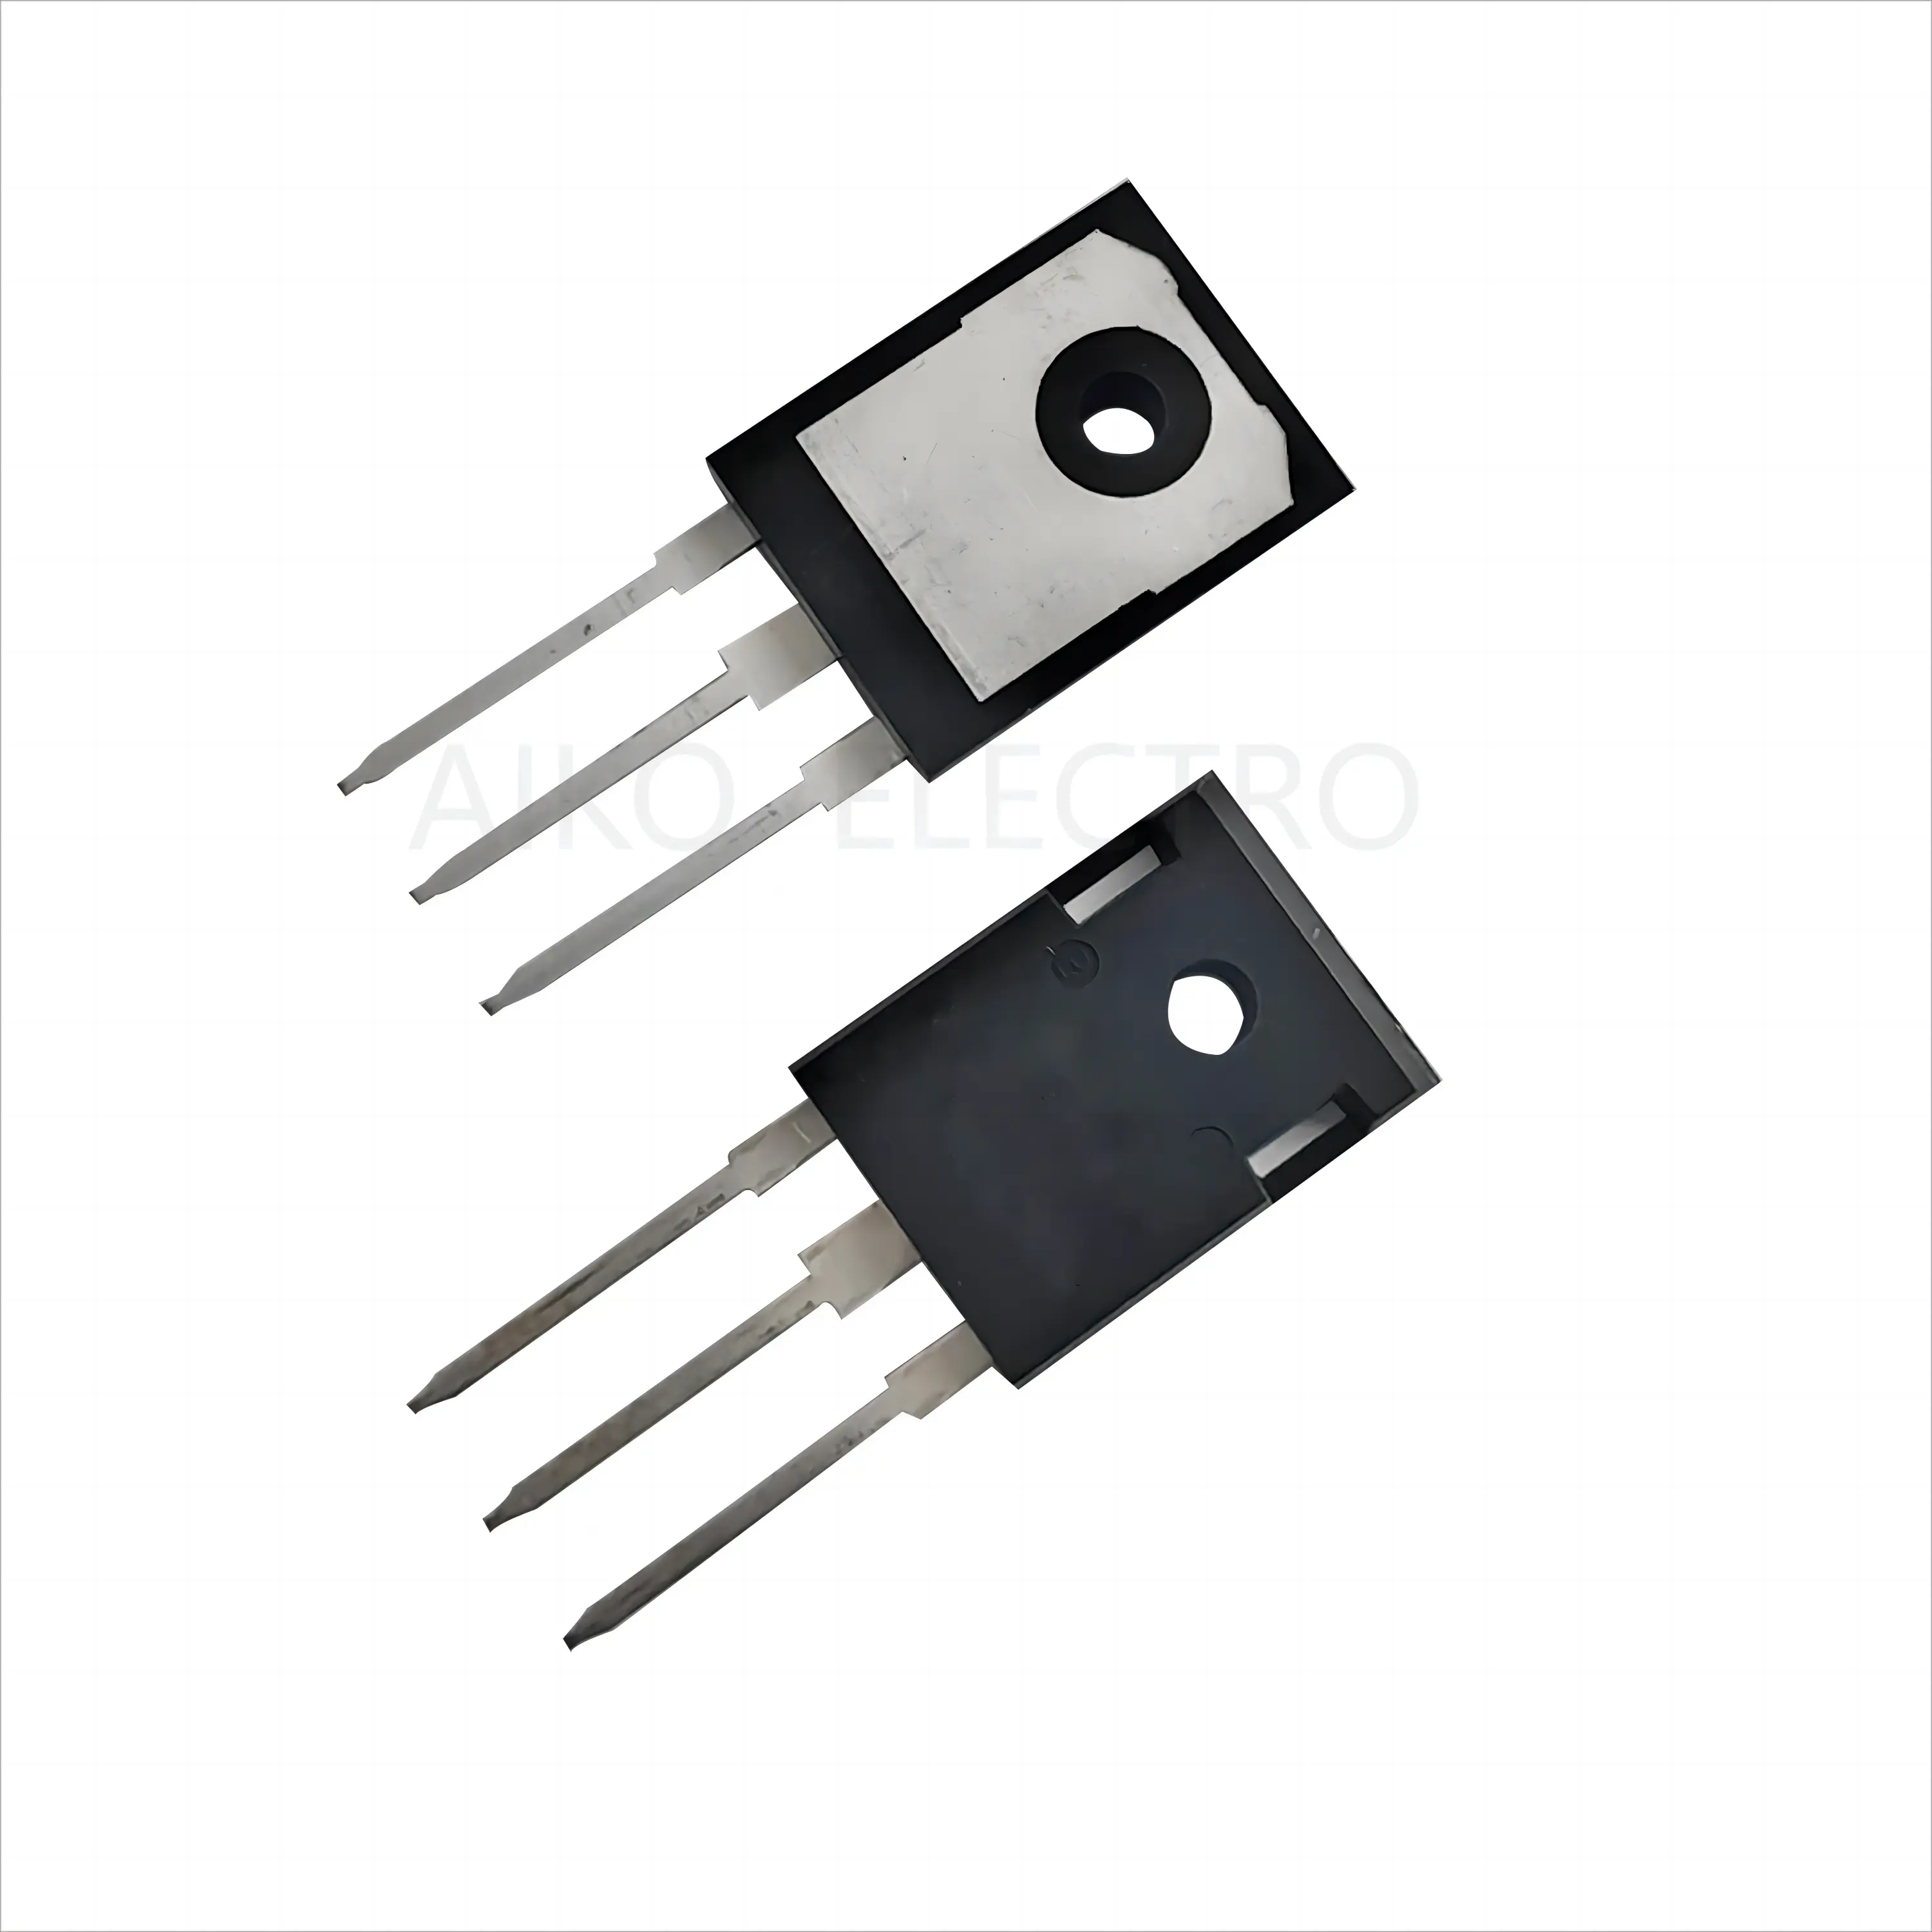 650V 60A IGBT Transistor With TO-247 Package For PFC UPS Welder PV Inverter and other switching applications